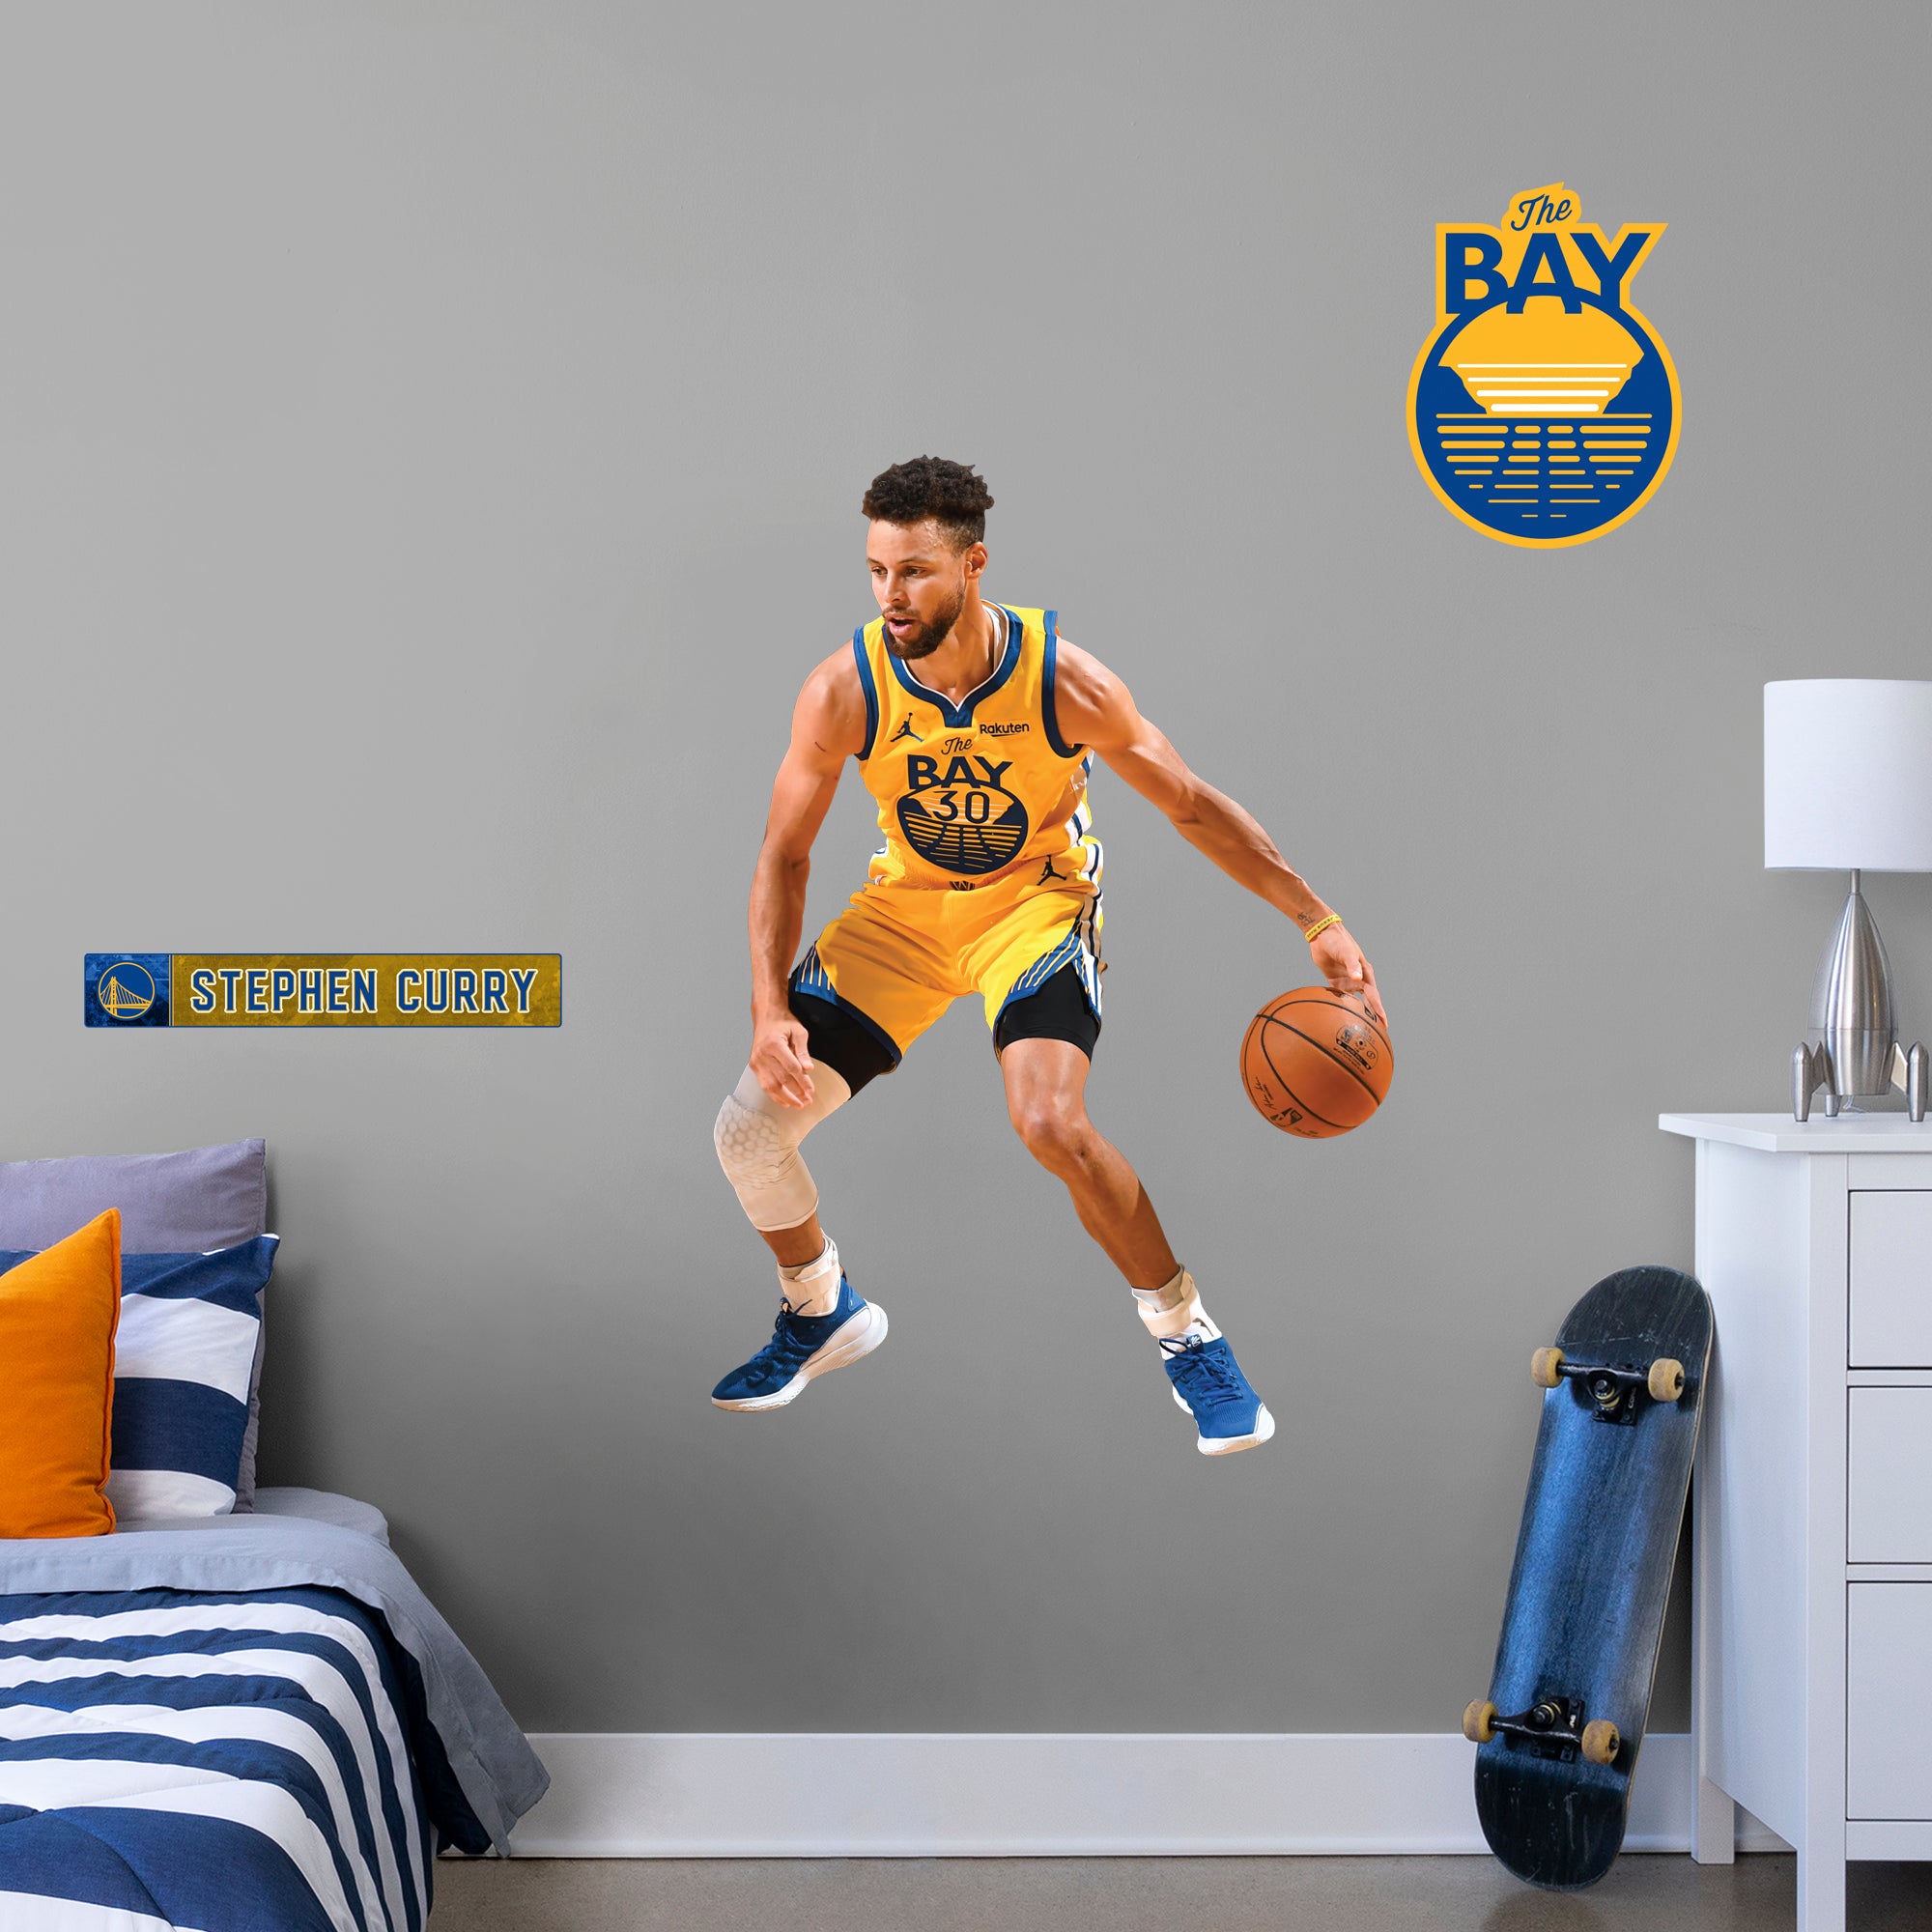 Stephen Curry 2021 The Bay - Officially Licensed NBA Removable Wall Decal Giant Athlete + 2 Decals (35"W x 51"H) by Fathead | Vi